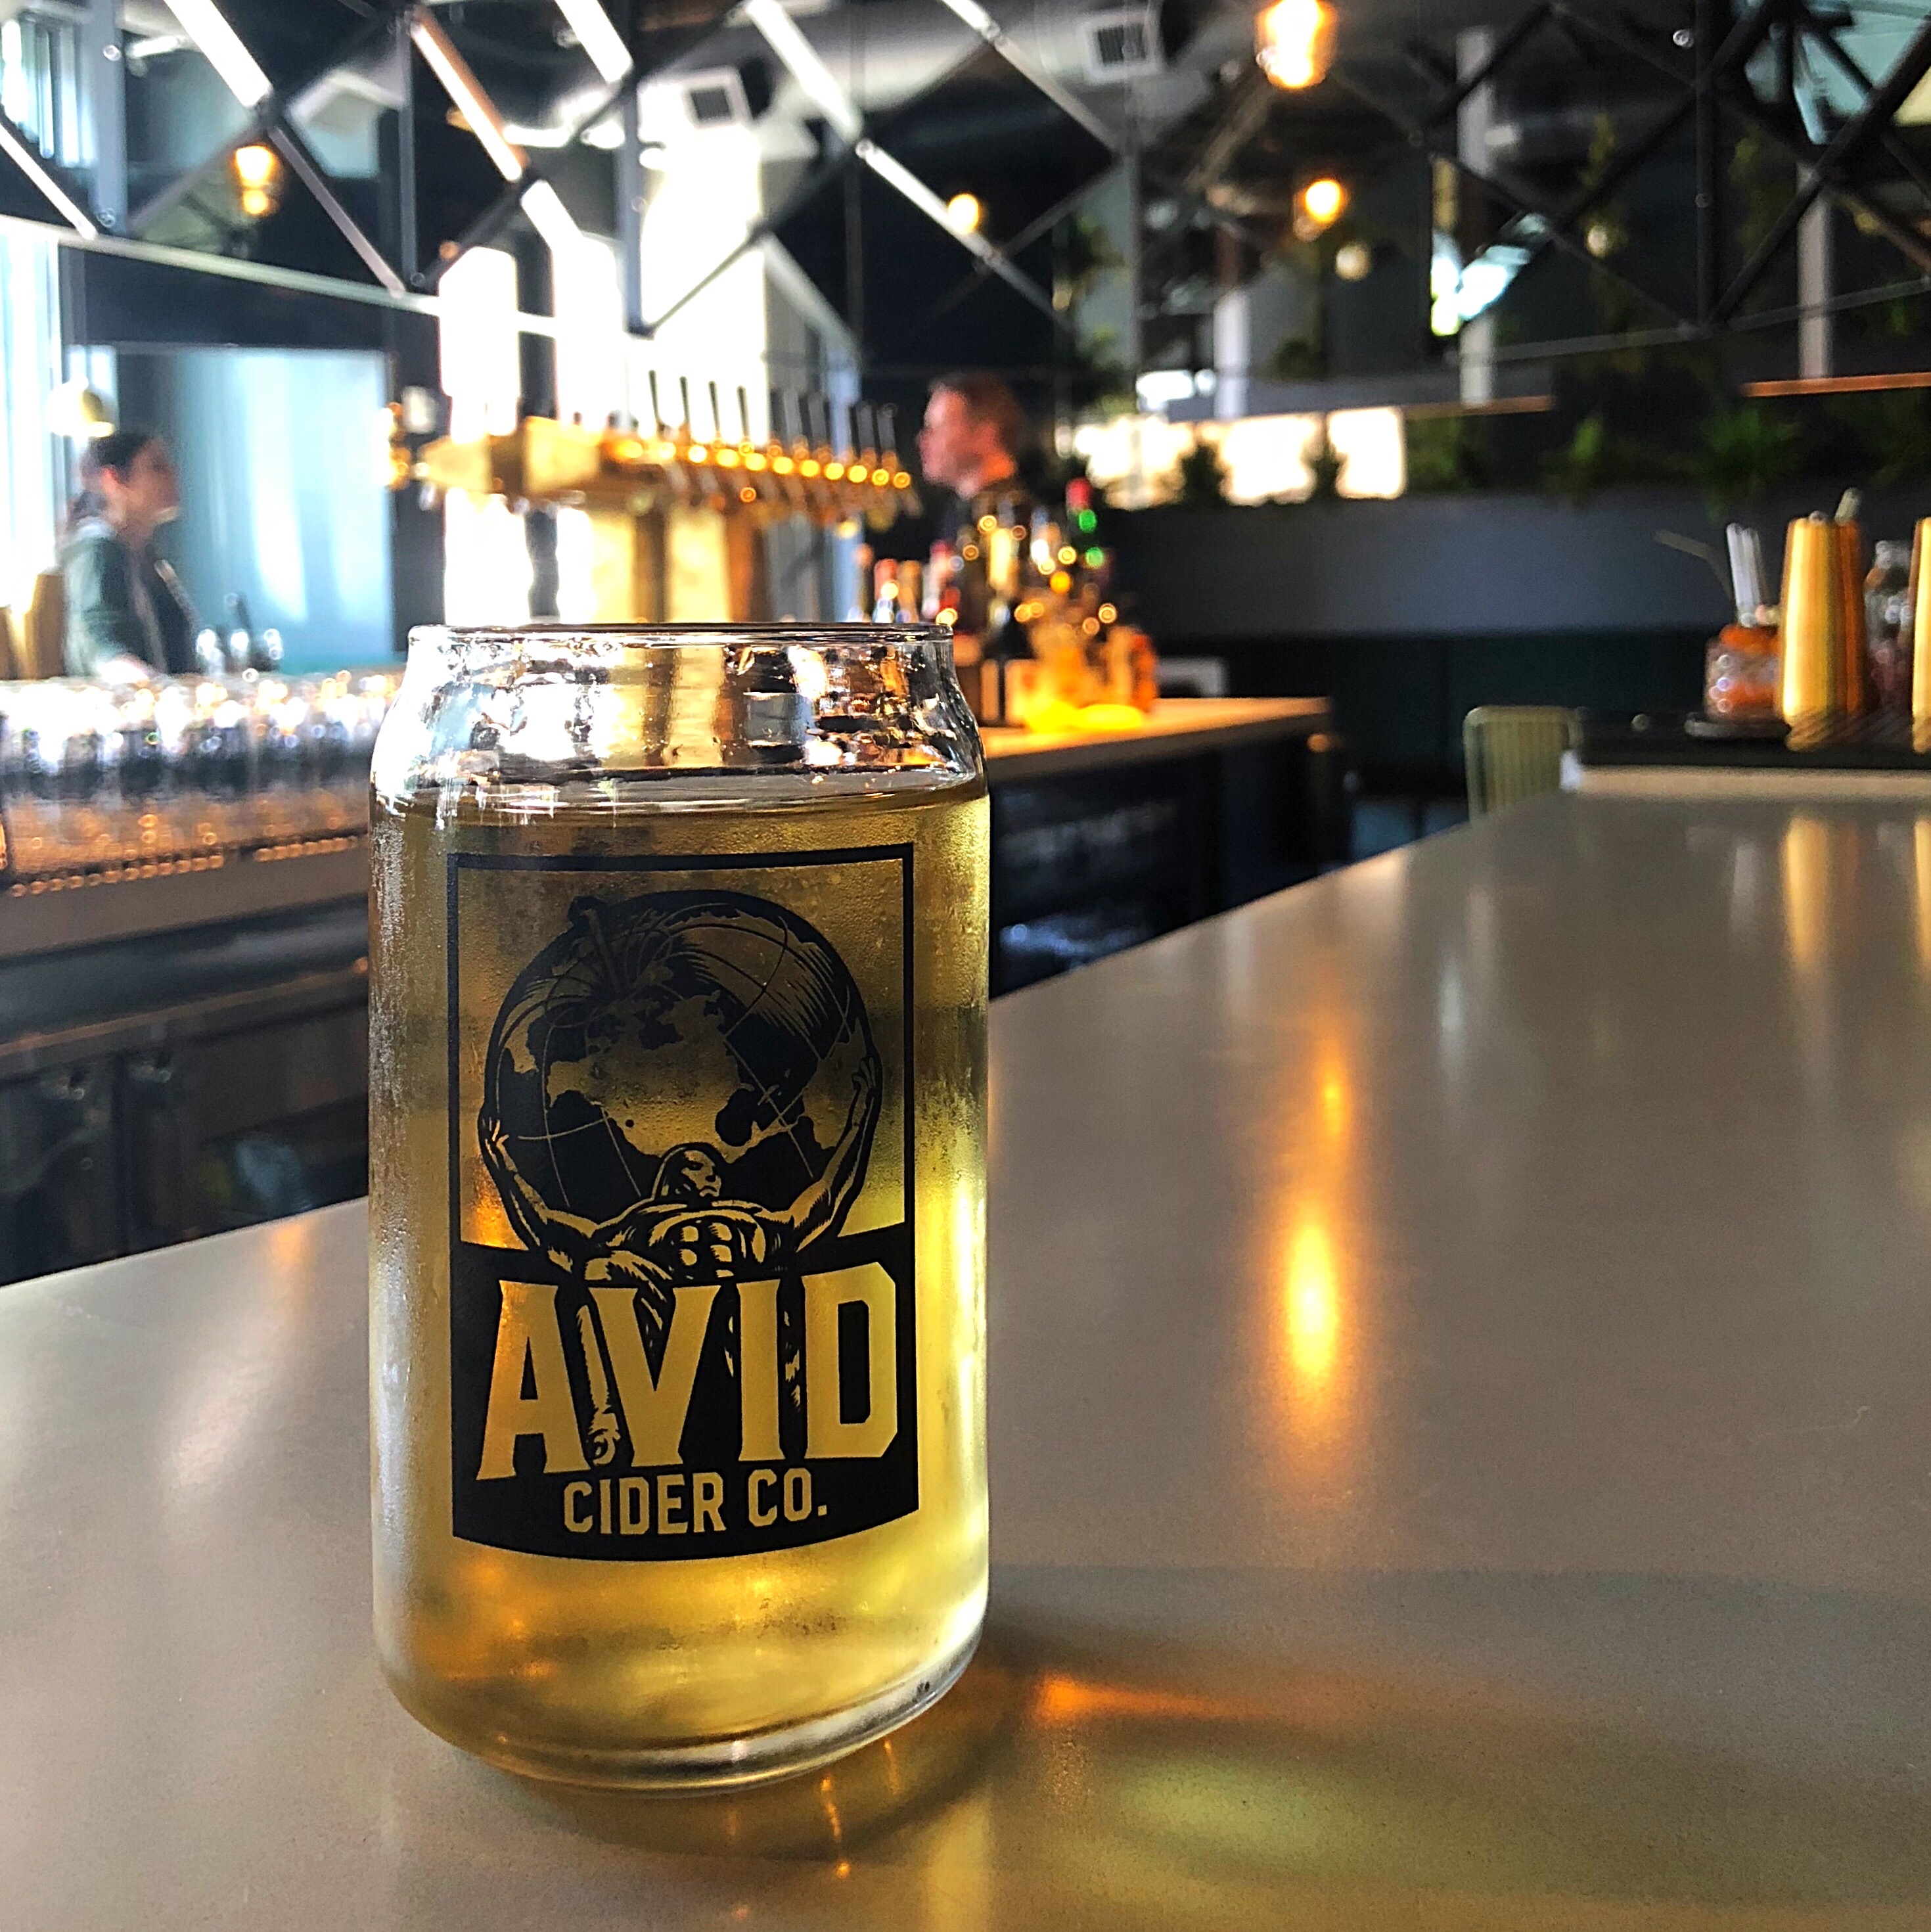 A pint of Avid Cider Co. Apricot Cider at the new Avid Cider Co. Cider House in Portland's Pearl District.